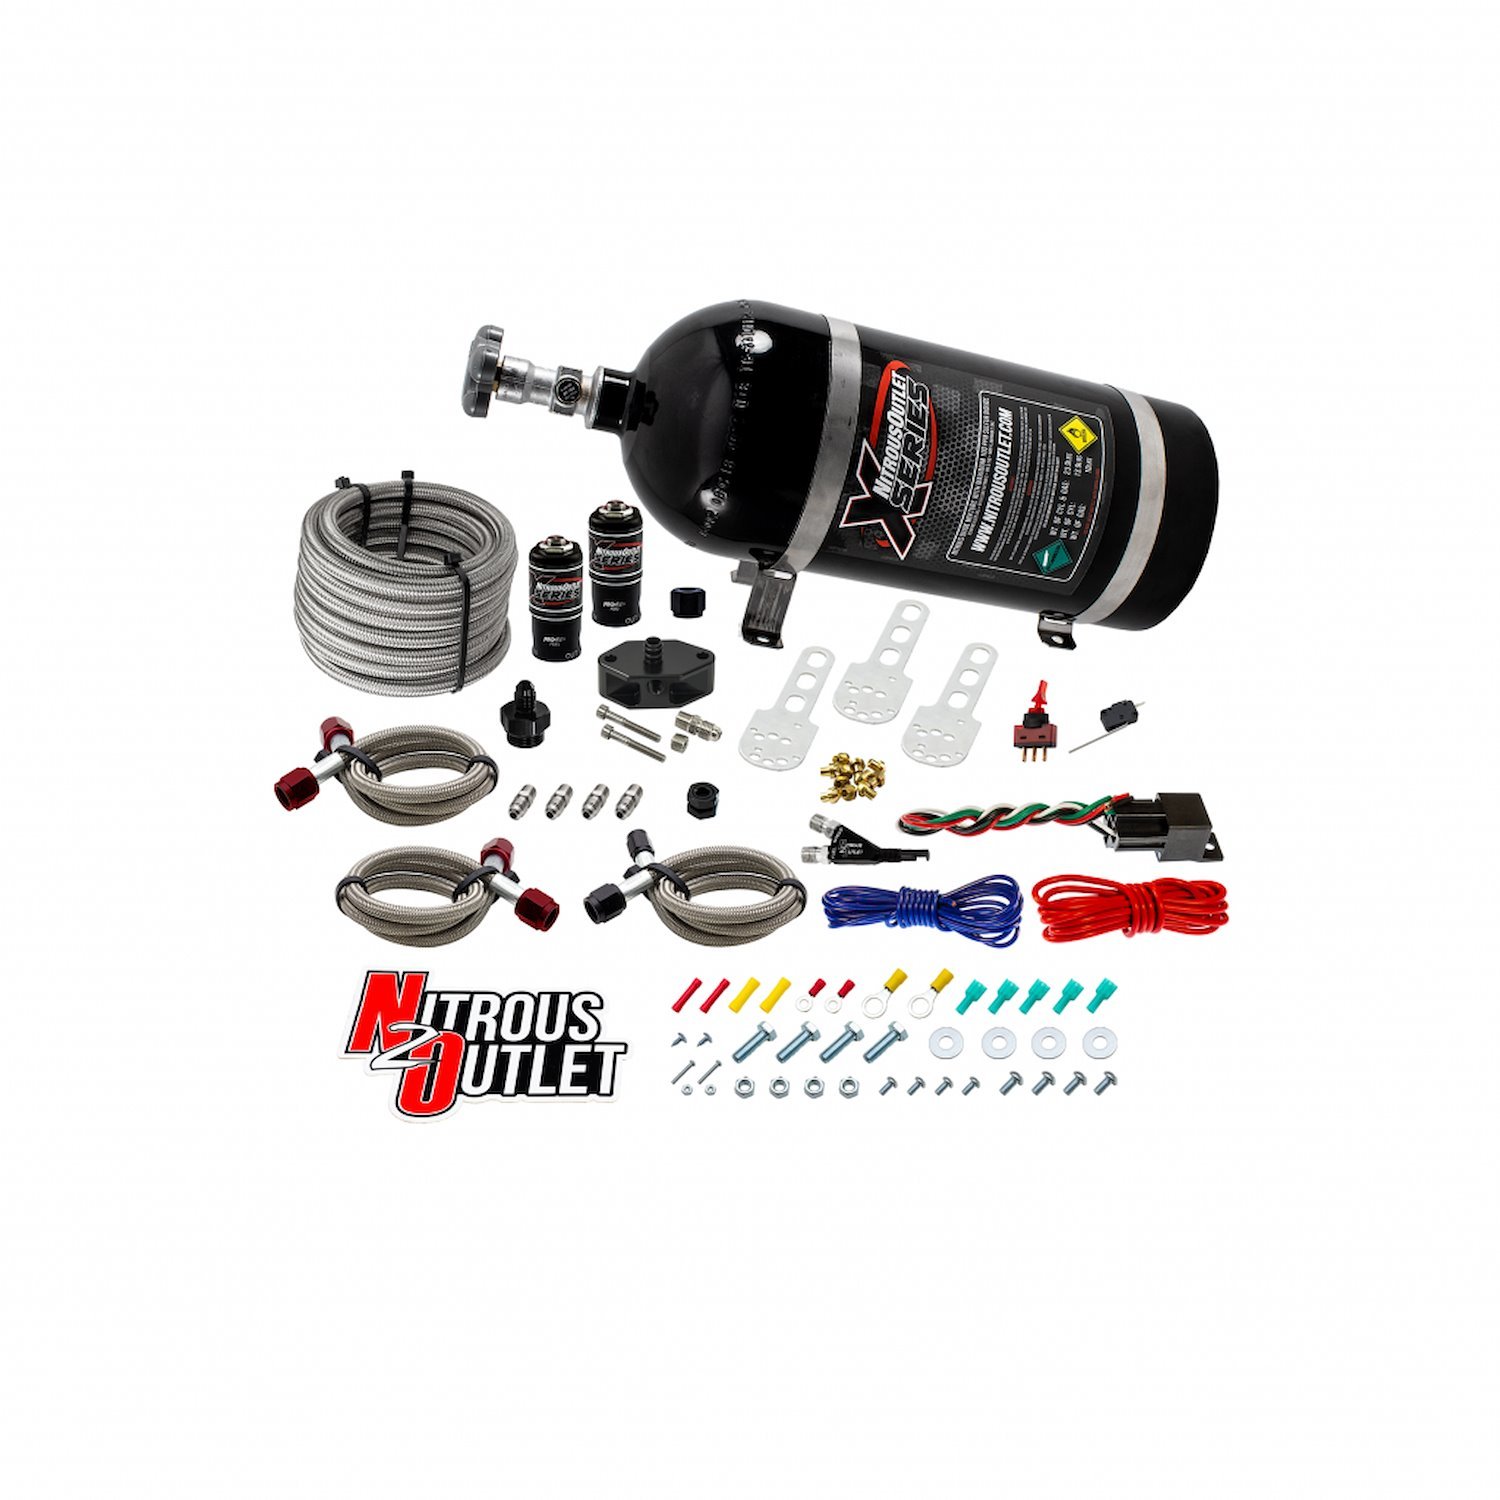 22-82001 X-Series Ford 1999-2004 Mustang GT, Cobra, Mach 1 EFI Single-Nozzle System, Gas/E85, 5-55psi, 35-200HP